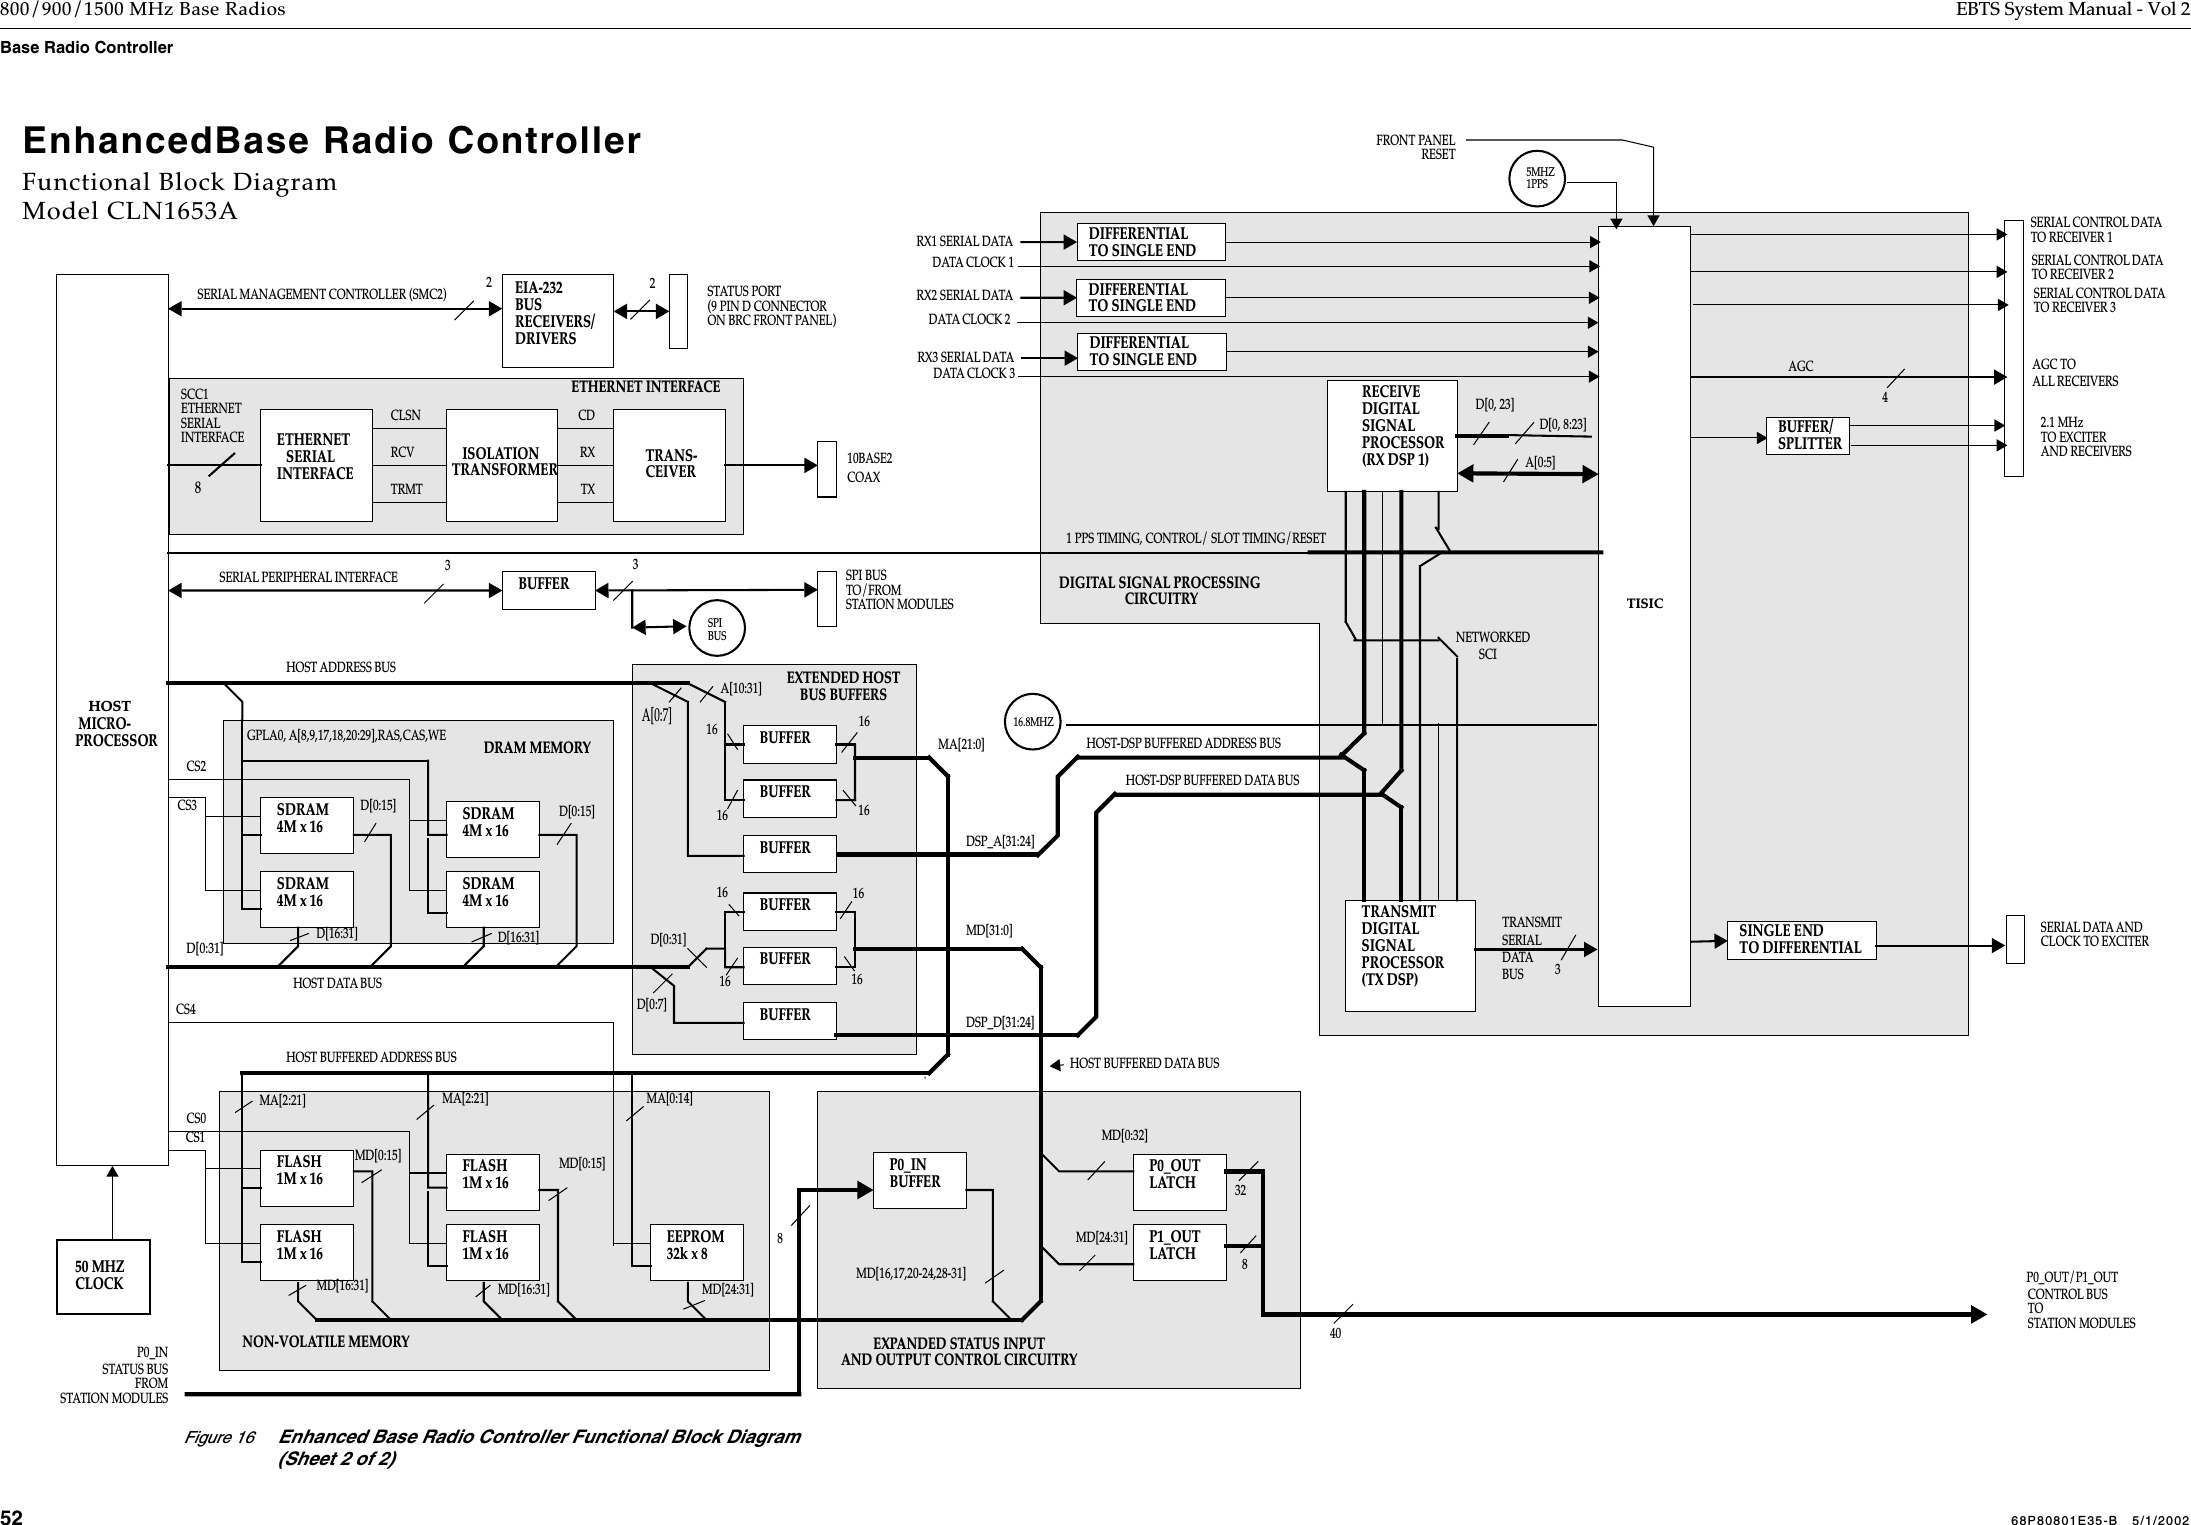  52 68P80801E35-B   5/1/2002 800/900/1500 MHz Base Radios EBTS System Manual - Vol 2 Base Radio Controller  Figure 16 Enhanced Base Radio Controller Functional Block Diagram (Sheet 2 of 2)EnhancedBase Radio ControllerFunctional Block DiagramModel CLN1653AHOSTMICRO-ETHERNETSERIALINTERFACETRANS-CDRCV RXTRMT TXCLSN10BASE2COAXETHERNETSERIALINTERFACECEIVERISOLATIONTRANSFORMERPROCESSORSCC18SDRAM4M x 16SDRAM4M x 16SDRAM4M x 16SDRAM4M x 16GPLA0, A[8,9,17,18,20:29],RAS,CAS,WECS2CS3D[0:31]D[0:15]D[16:31]D[0:15]D[16:31]BUFFERBUFFERBUFFERBUFFERBUFFERBUFFERD[0:31]D[0:7]A[10:31]MA[21:0]DSP_D[31:24]A[0:7]DSP_A[31:24]MD[31:0]EIA-232BUSRECEIVERS/DRIVERS2STATUS PORT(9 PIN D CONNECTORON BRC FRONT PANEL)2BUFFER33SPI BUS TO/FROM STATION MODULESFLASH1M x 16FLASH1M x 16FLASH1M x 16FLASH1M x 16CS0CS1MD[0:15]MD[16:31]MD[0:15]MD[16:31]1616161616 161616MA[2:21]MA[2:21]EEPROM32k x 8MD[24:31]MA[0:14]CS4P1_OUTLATCHP0_OUTLATCHMD[0:32]MD[24:31]P0_INBUFFERMD[16,17,20-24,28-31]STATUS BUSFROMSTATION MODULESP0_IN8CONTROL BUSTOSTATION MODULESP0_OUT/P1_OUT328TRANSMITDIGITALSIGNALPROCESSOR(TX DSP)SINGLE ENDTO DIFFERENTIALSERIAL DATA ANDCLOCK TO EXCITERDIFFERENTIALTO SINGLE ENDRX1 SERIAL DATARECEIVEDIGITALSIGNALPROCESSOR(RX DSP 1)TISICA[0:5]D[0, 8:23]D[0, 23]SERIAL CONTROL DATATO RECEIVER 12.1 MHz1 PPS TIMING, CONTROL/ SLOT TIMING/RESETNETWORKEDSCI16.8MHZSPIBUSDIGITAL SIGNAL PROCESSING CIRCUITRYDIFFERENTIALTO SINGLE ENDDIFFERENTIALTO SINGLE END50 MHZCLOCKFRONT PANELRESETDRAM MEMORYETHERNET INTERFACENON-VOLATILE MEMORY EXPANDED STATUS INPUTAND OUTPUT CONTROL CIRCUITRYEXTENDED HOSTBUS BUFFERS40TO EXCITER5MHZ1PPSRX2 SERIAL DATARX3 SERIAL DATAHOST ADDRESS BUSHOST DATA BUSHOST BUFFERED DATA BUSHOST BUFFERED ADDRESS BUSHOST-DSP BUFFERED DATA BUSHOST-DSP BUFFERED ADDRESS BUSSERIAL MANAGEMENT CONTROLLER (SMC2)SERIAL PERIPHERAL INTERFACEAND RECEIVERSSERIAL CONTROL DATATO RECEIVER 2SERIAL CONTROL DATATO RECEIVER 3BUFFER/SPLITTERTRANSMITSERIALDATA BUS 3AGC4DATA CLOCK 2DATA CLOCK 1DATA CLOCK 3 AGC TOALL RECEIVERS